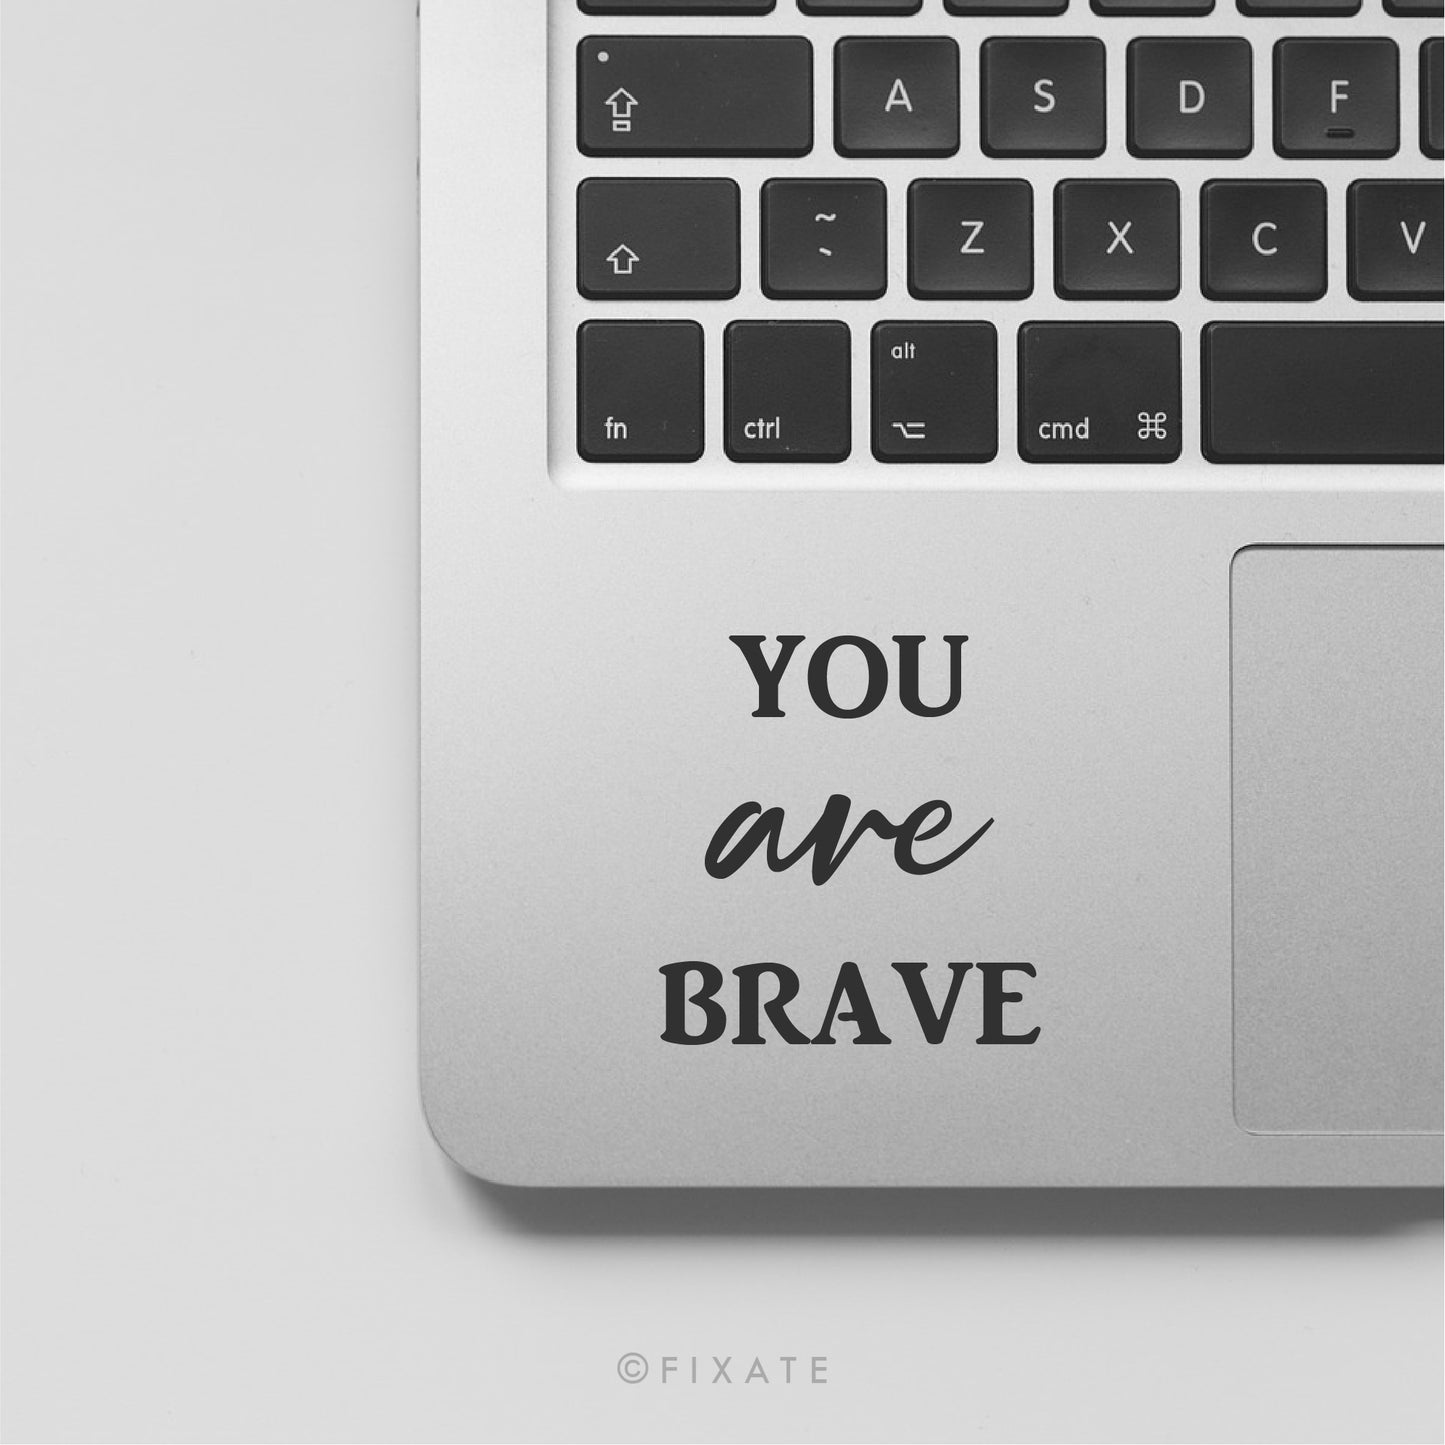 I Am Brave Laptop Mirror Decal Affirmation Sticker For Mirror Or Macbook You Are Brave Vinyl Decal Positive Quote Bathroom Decor